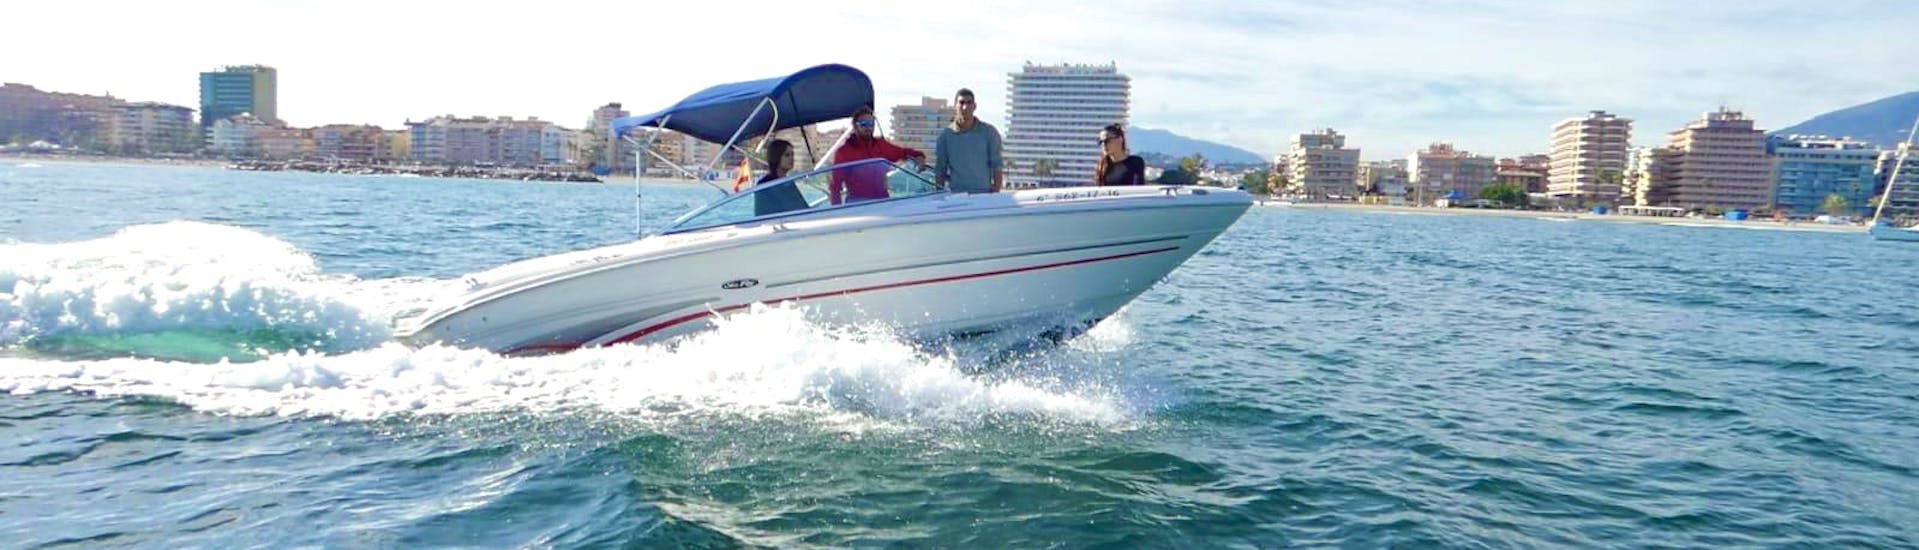 A luxurious SEA RAY SELECT 200 boat cruising along the Alboran Sea during a boat rental in Marbella for up to 8 people with licence with Marbella Renting Boat.